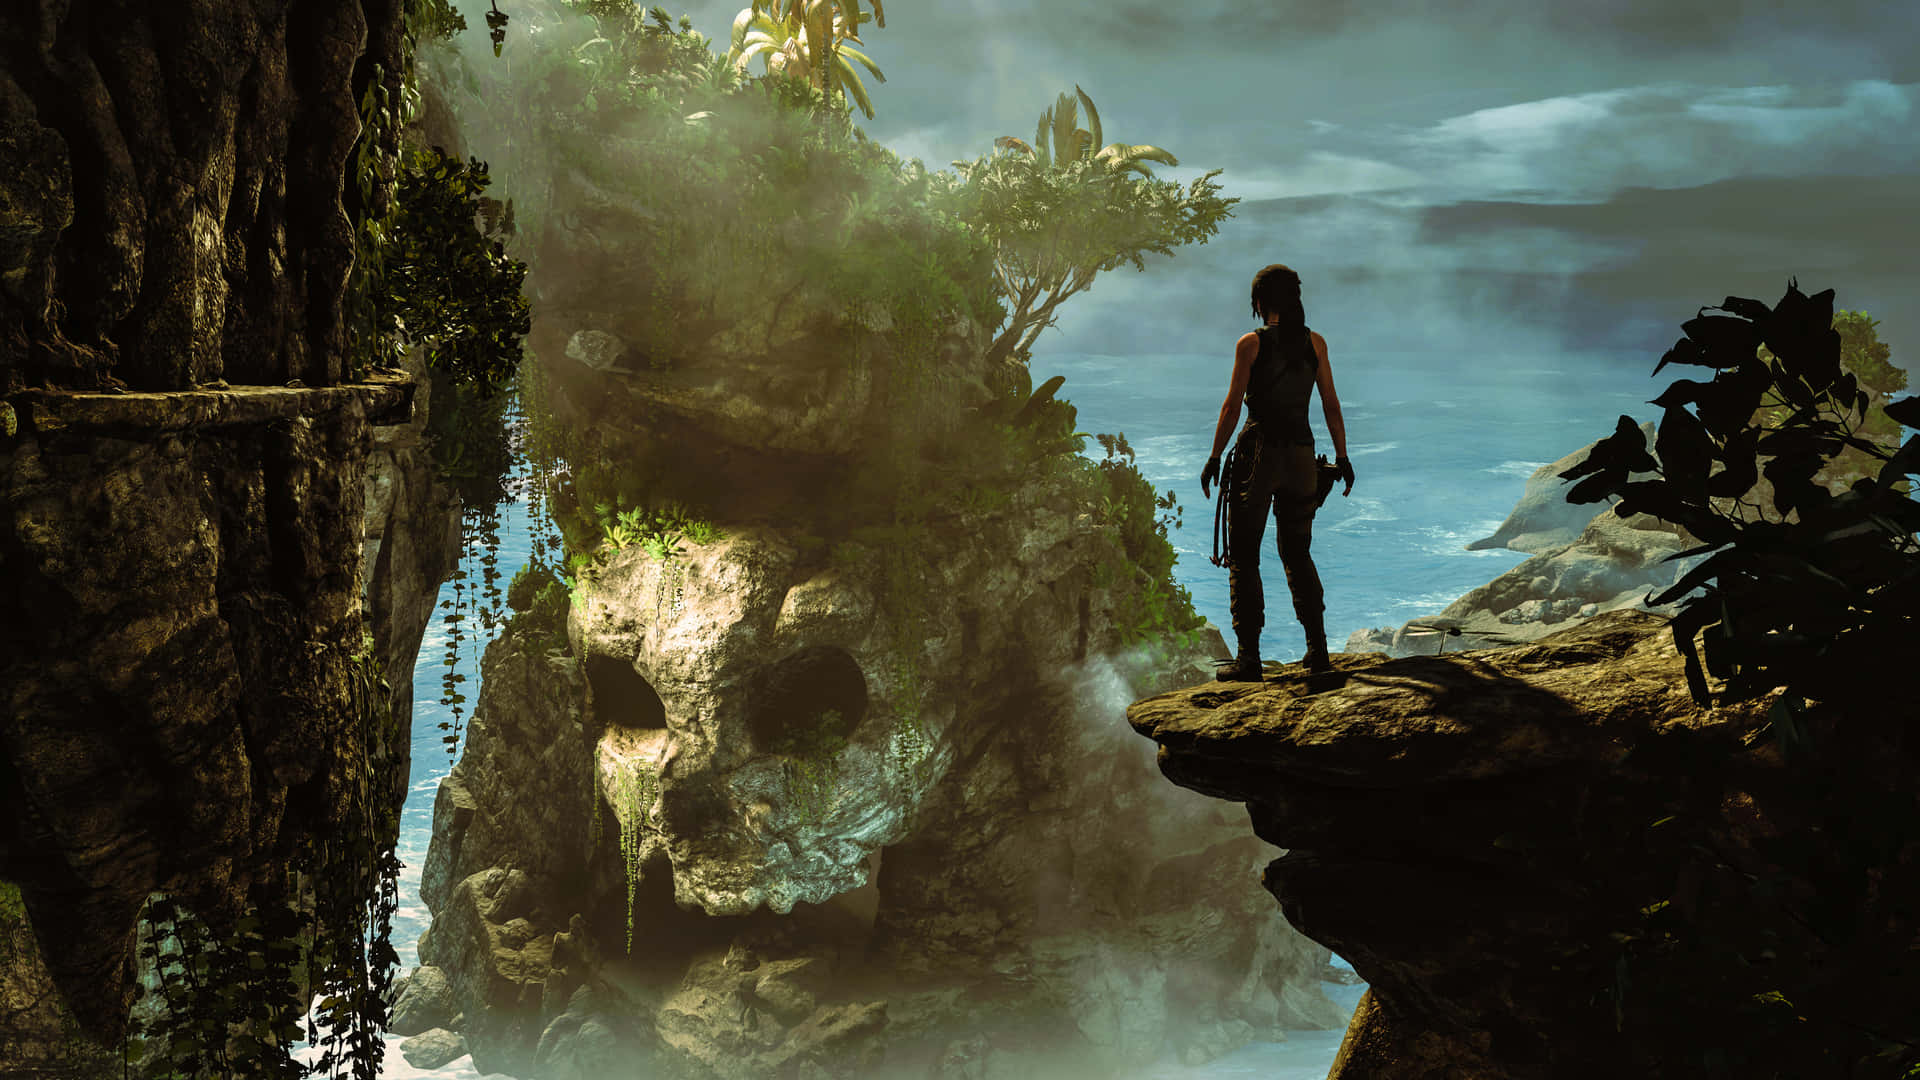 Lara Croft takes the plunge and discovers the dangers of the depths within Shadow of the Tomb Raider Wallpaper